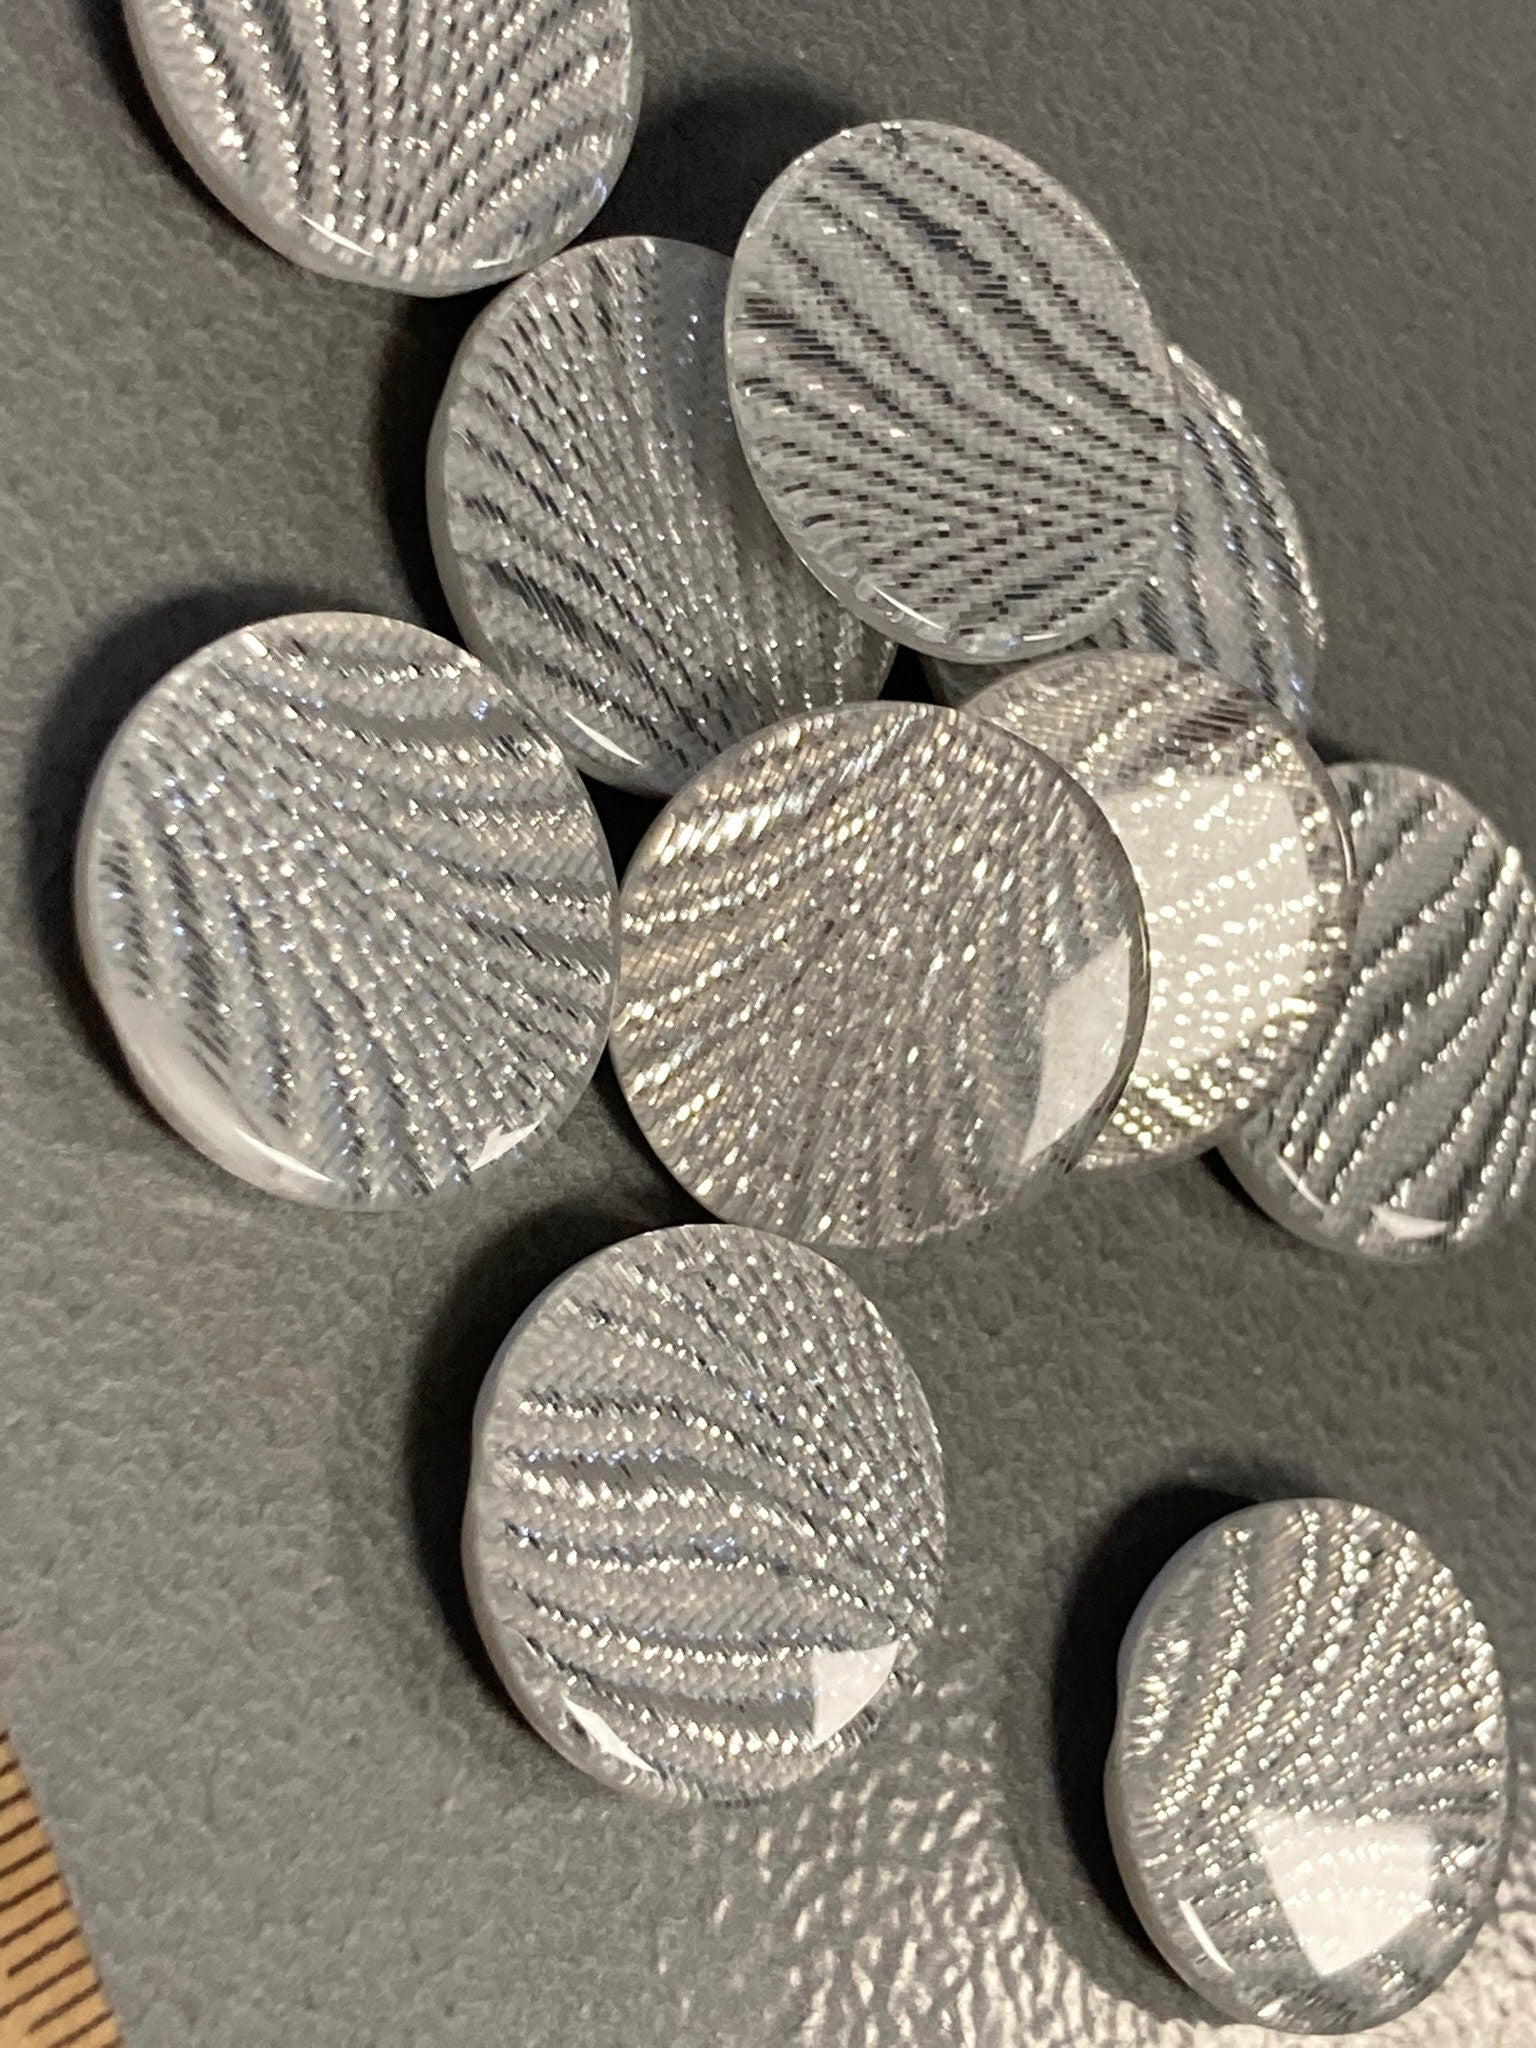 Set of 10 x 22mm plastic silver textured buttons silver glittery bling buttons sewing haberdashery craft